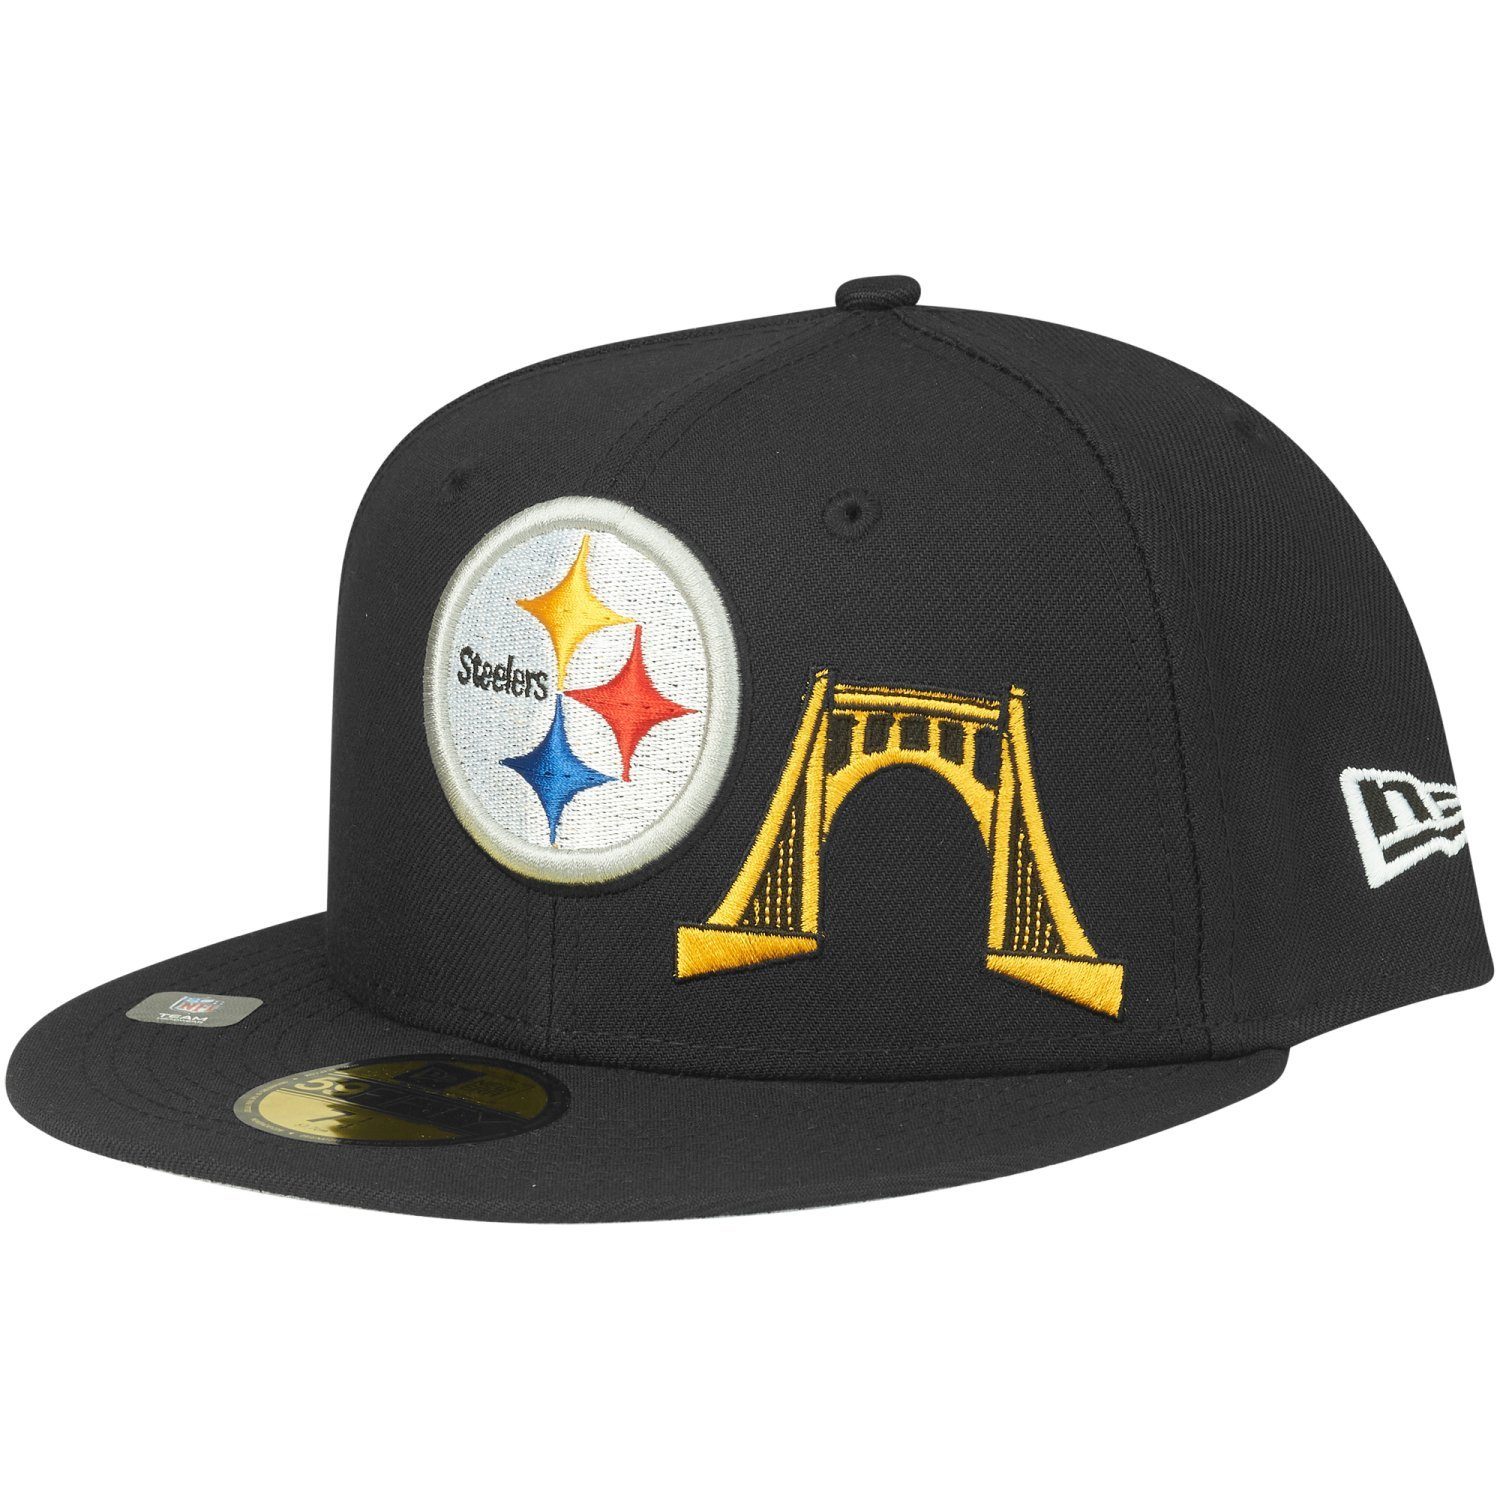 New Era Fitted Pittsburgh Cap 59Fifty NFL Steelers CITY